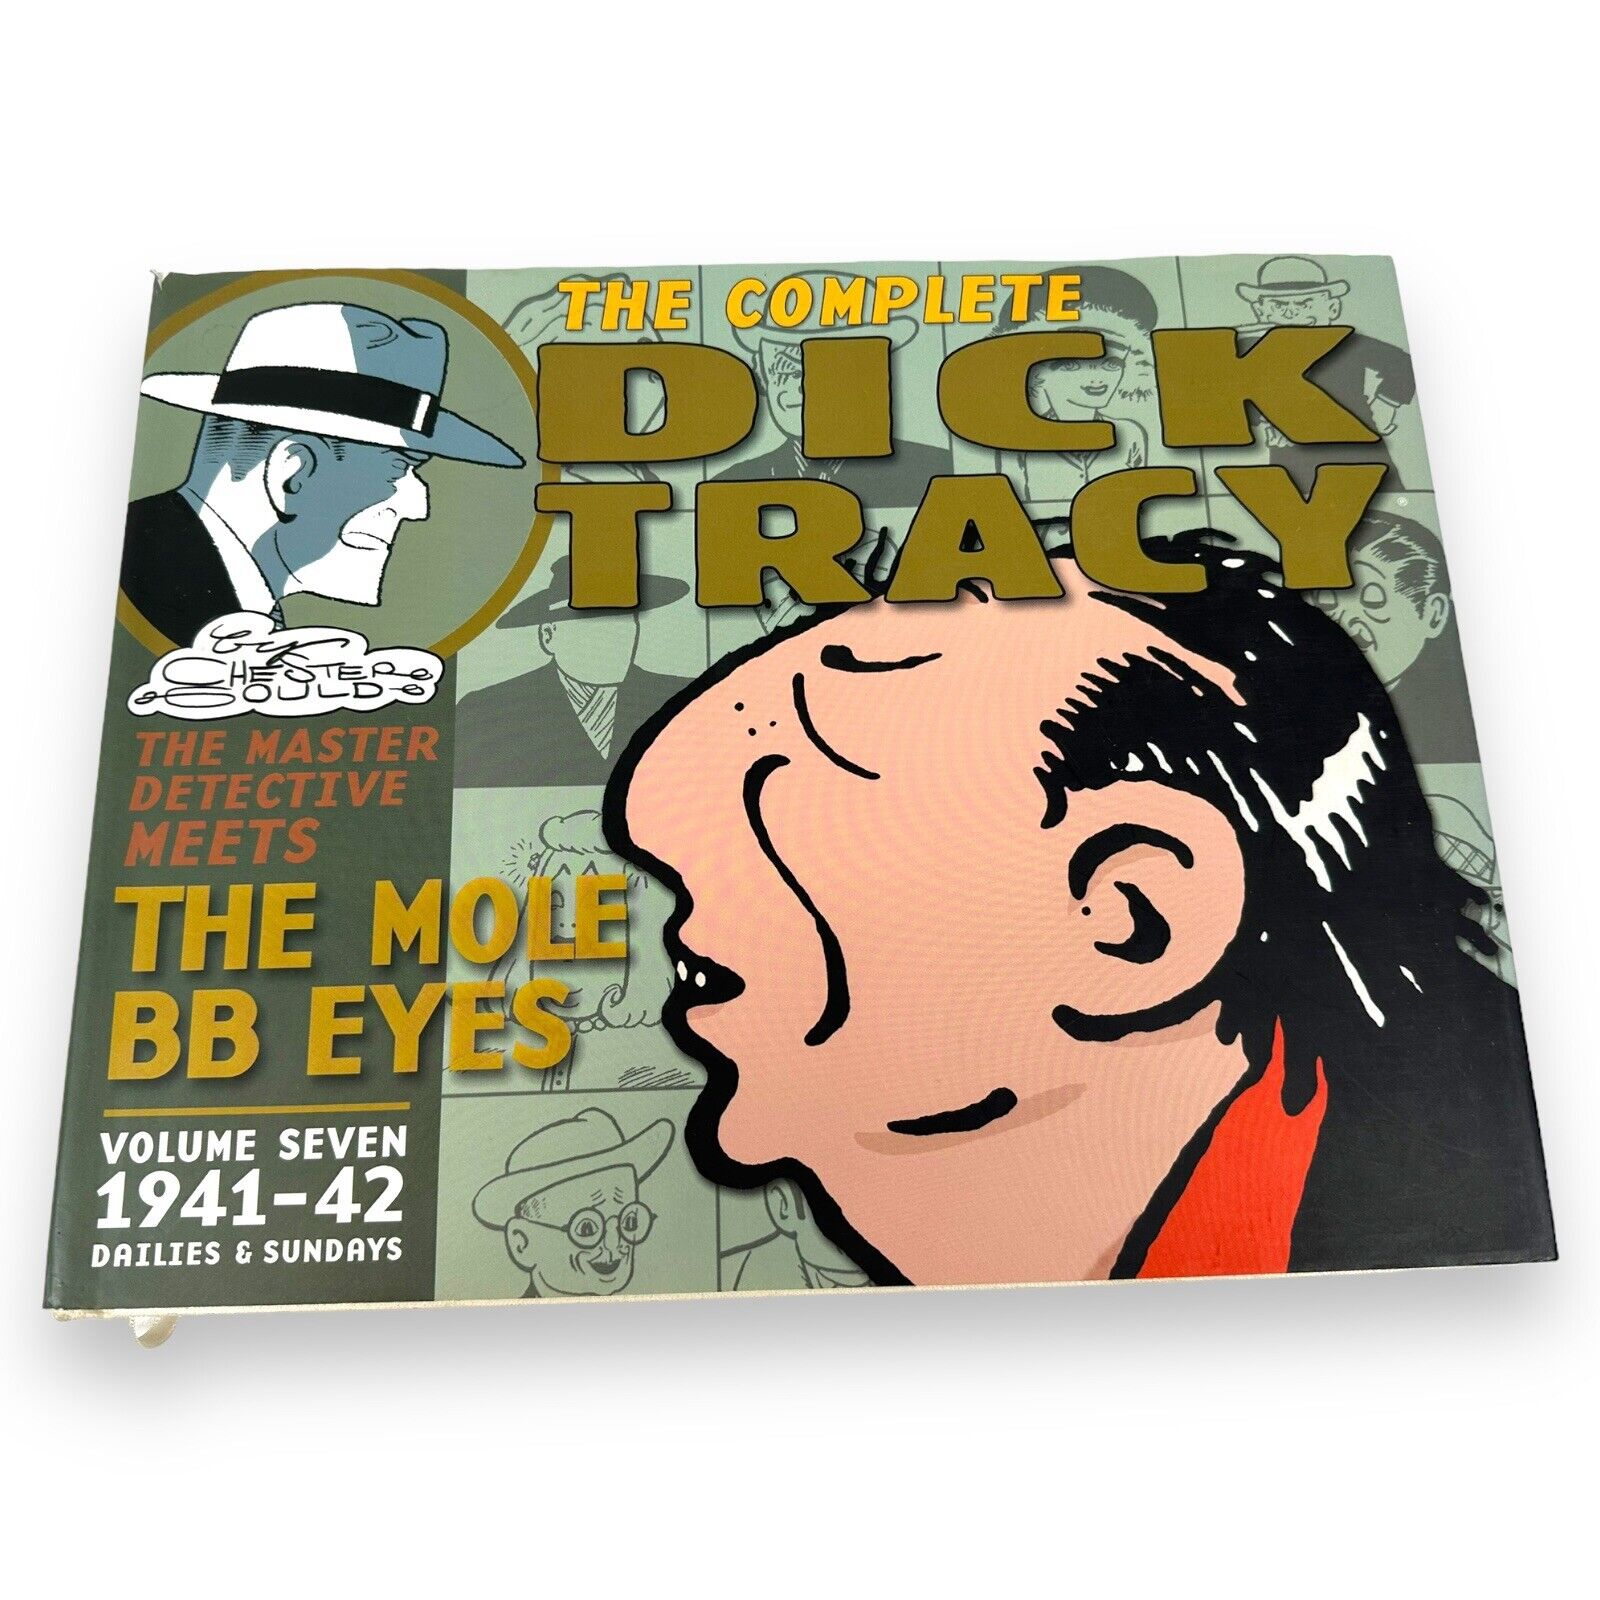 The Complete Dick Tracy Vol. 7 1941-42 Dailies & Sundays - Chester Gould